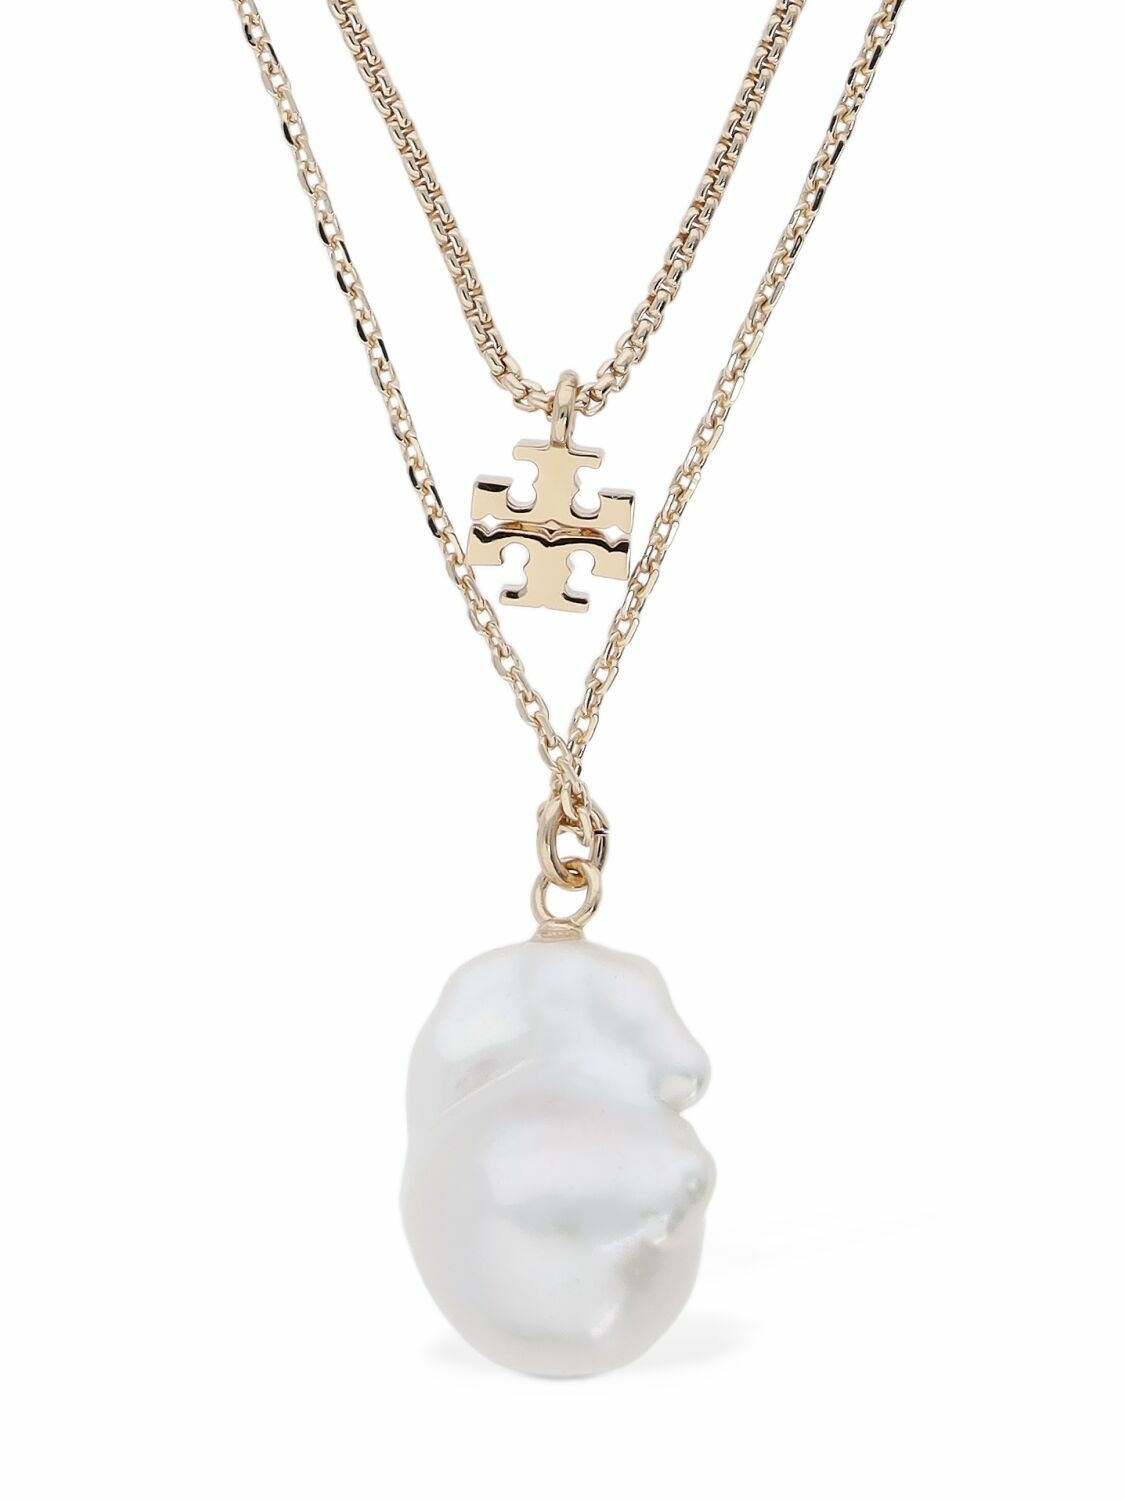 Photo: TORY BURCH Kira Delicate Pearl Layered Necklace